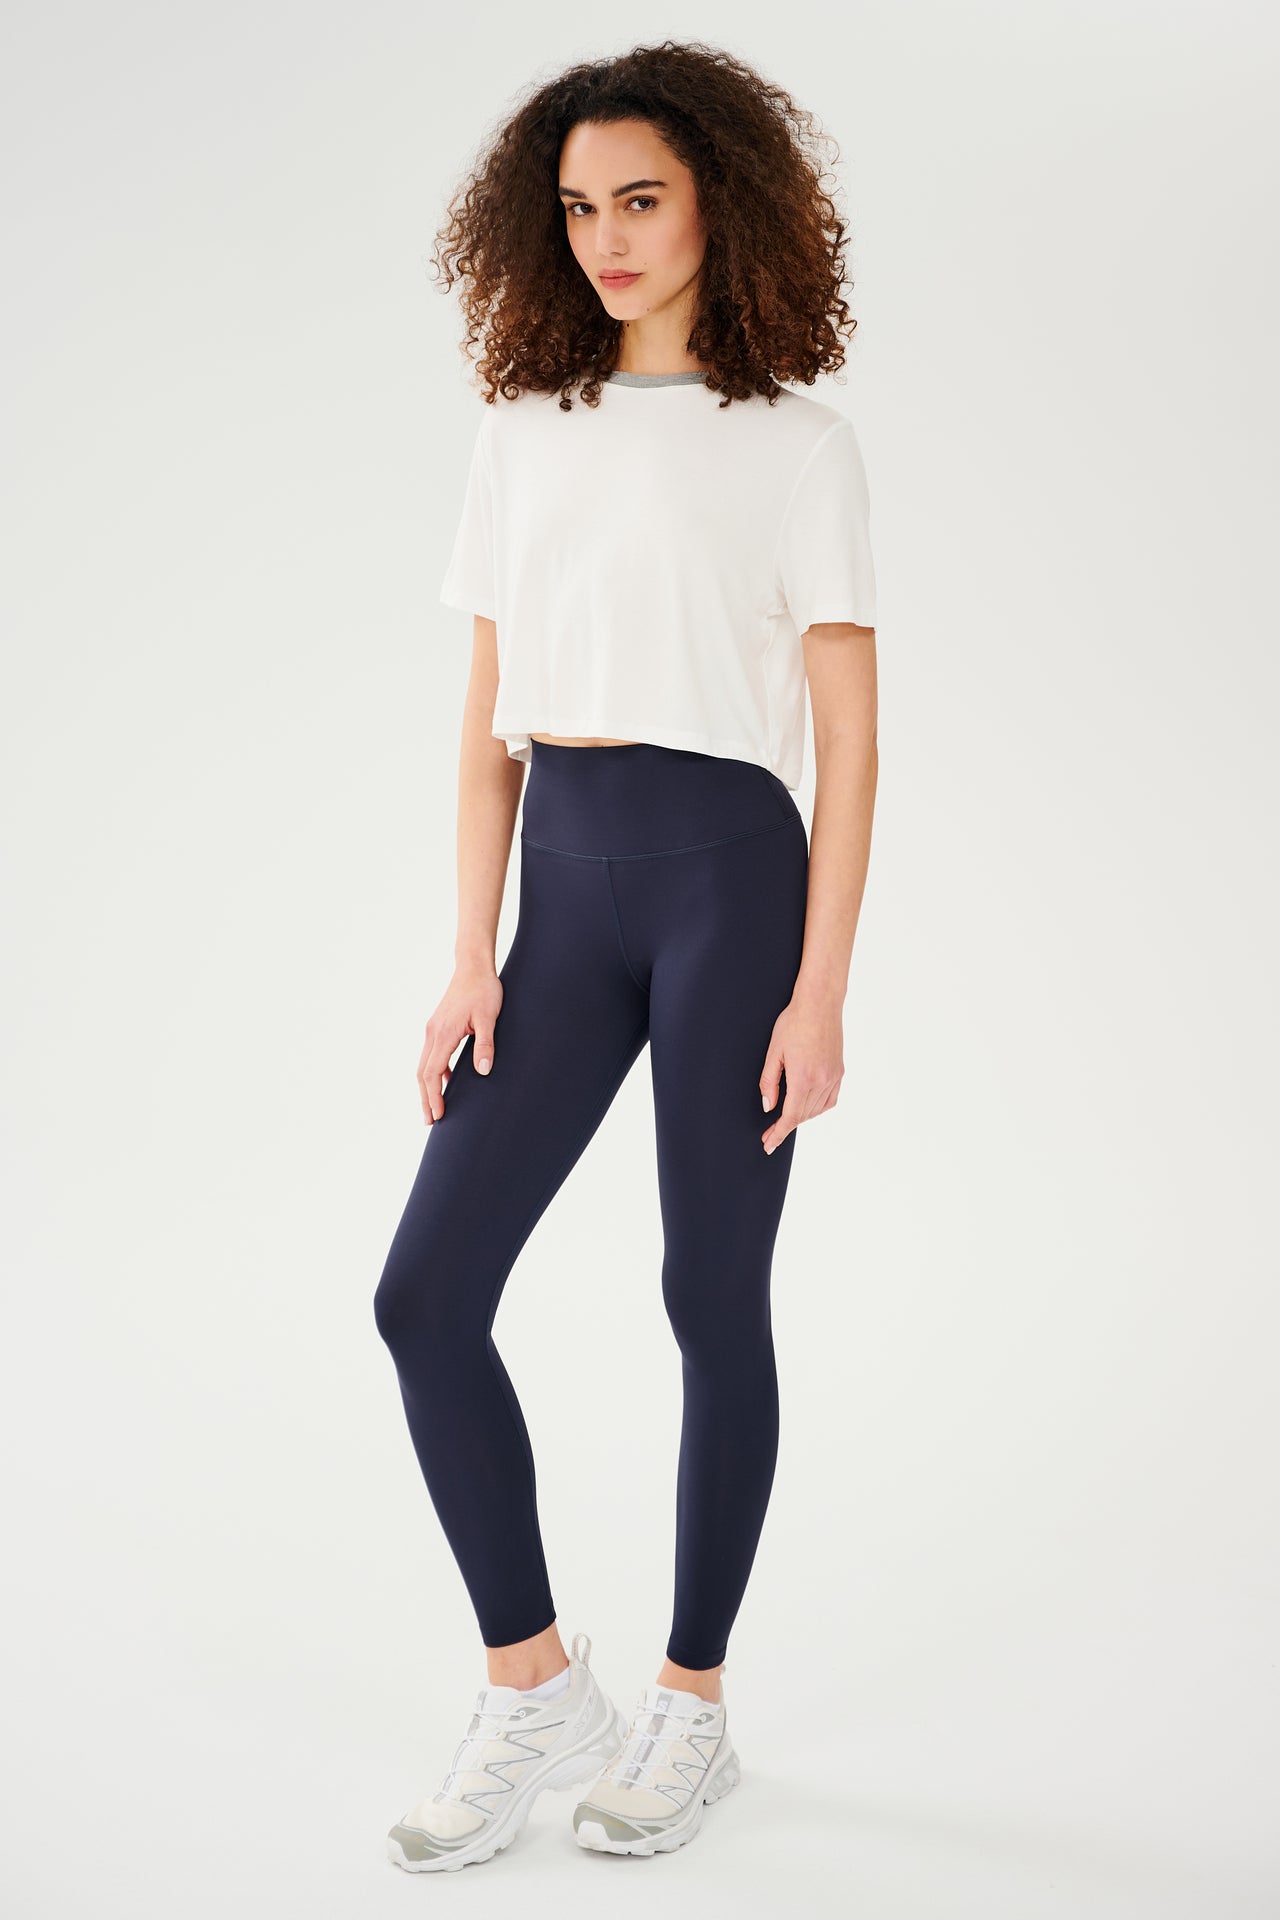 Full side view of girl wearing white cropped short sleeve t-shirt with thin light grey neck hem and dark blue leggings with white shoes